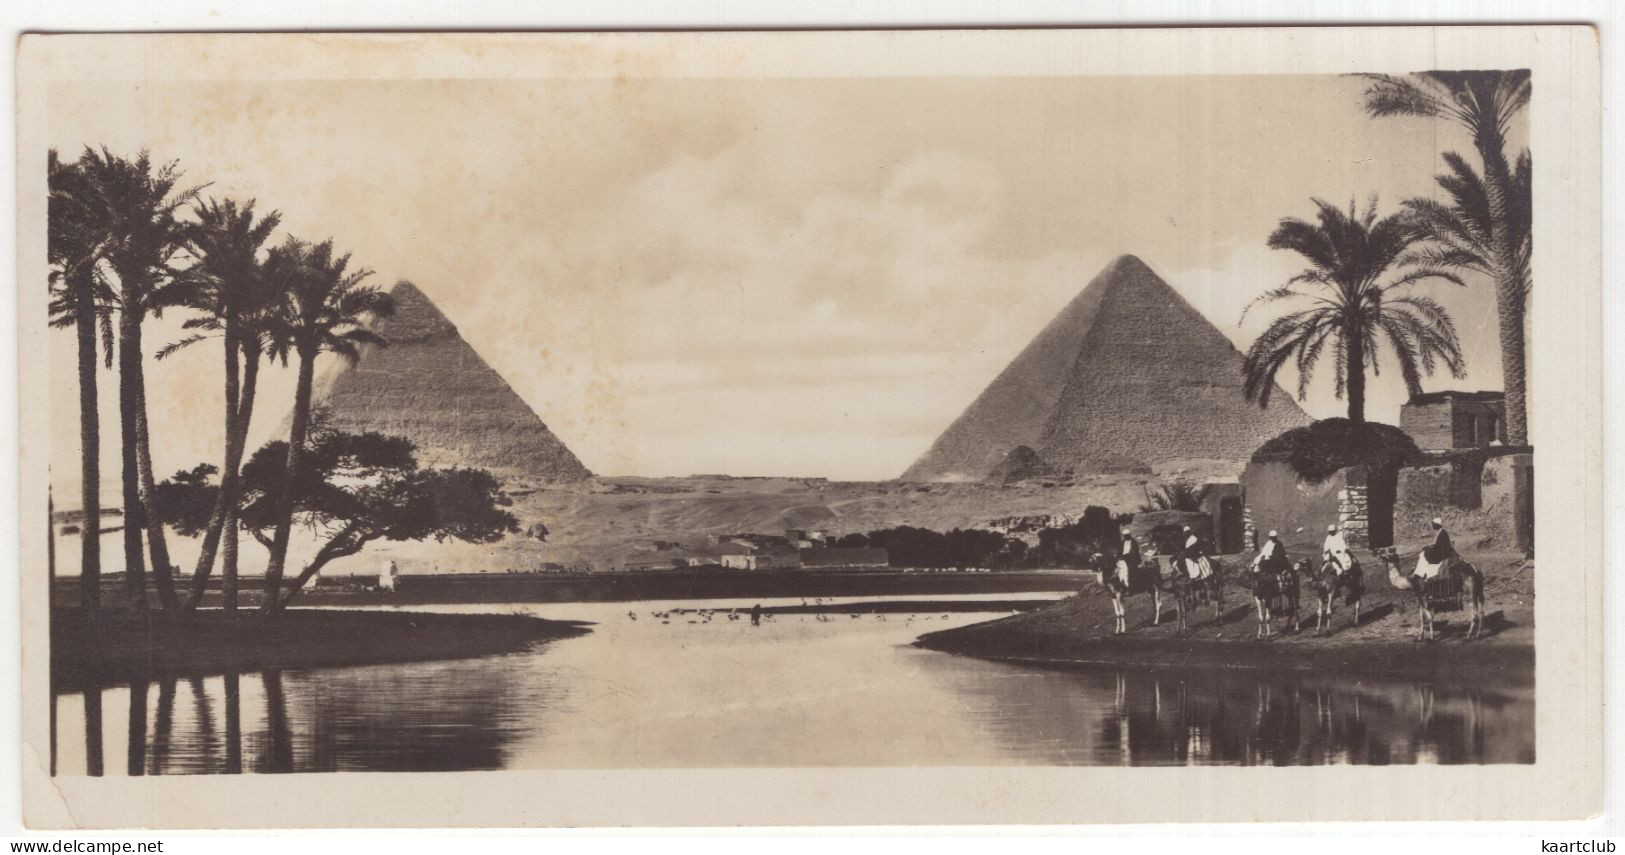 Cairo. Innondation At The Pyramids - (Egypt) - No. 3 - Zogolopoulo Frères, Cairo - (Size: 15 Cm X 7.5 Cm) - Kairo